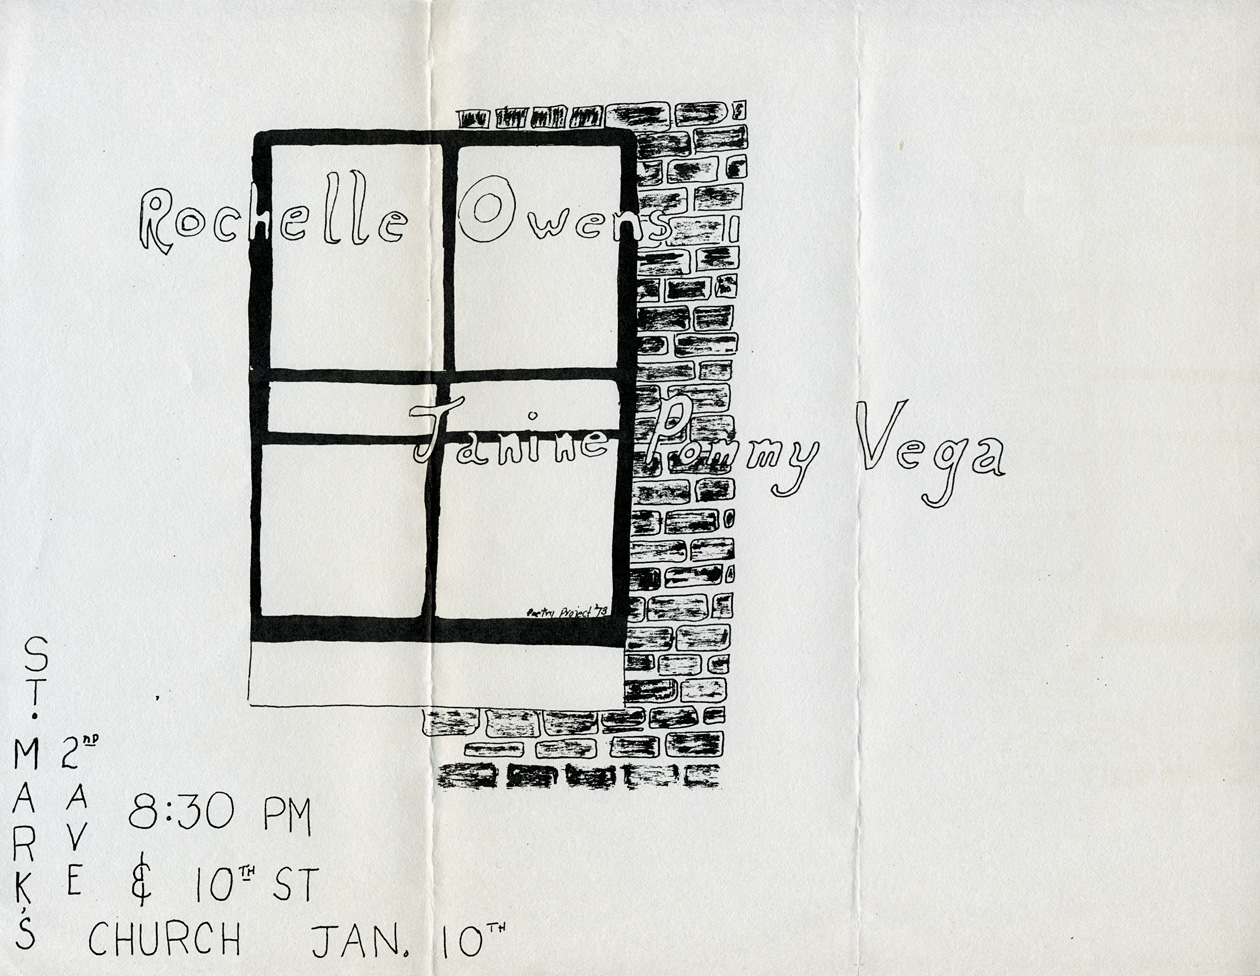 Flyer for reading by Rachel Owens and Janine Pommy Vega at The Poetry Project at St. Mark’s Church, January 10, [no year]. 8 1/2 x 11 inches.